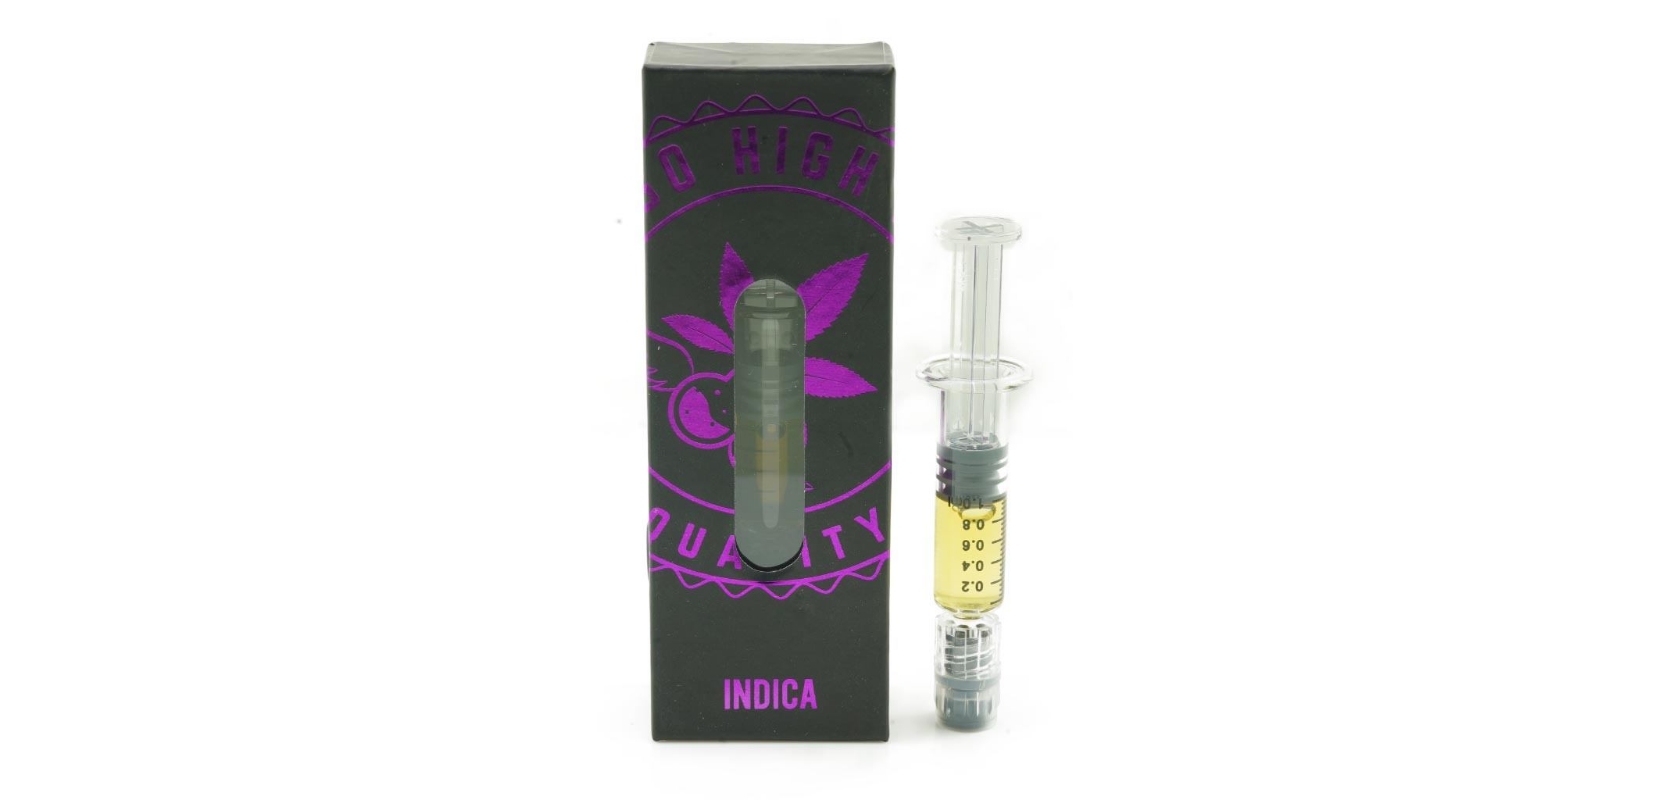 Stoners on the hunt for the perfect THC syringe to chase away tension will find quick relief in Gorilla Glue #4 THC Syringes. 